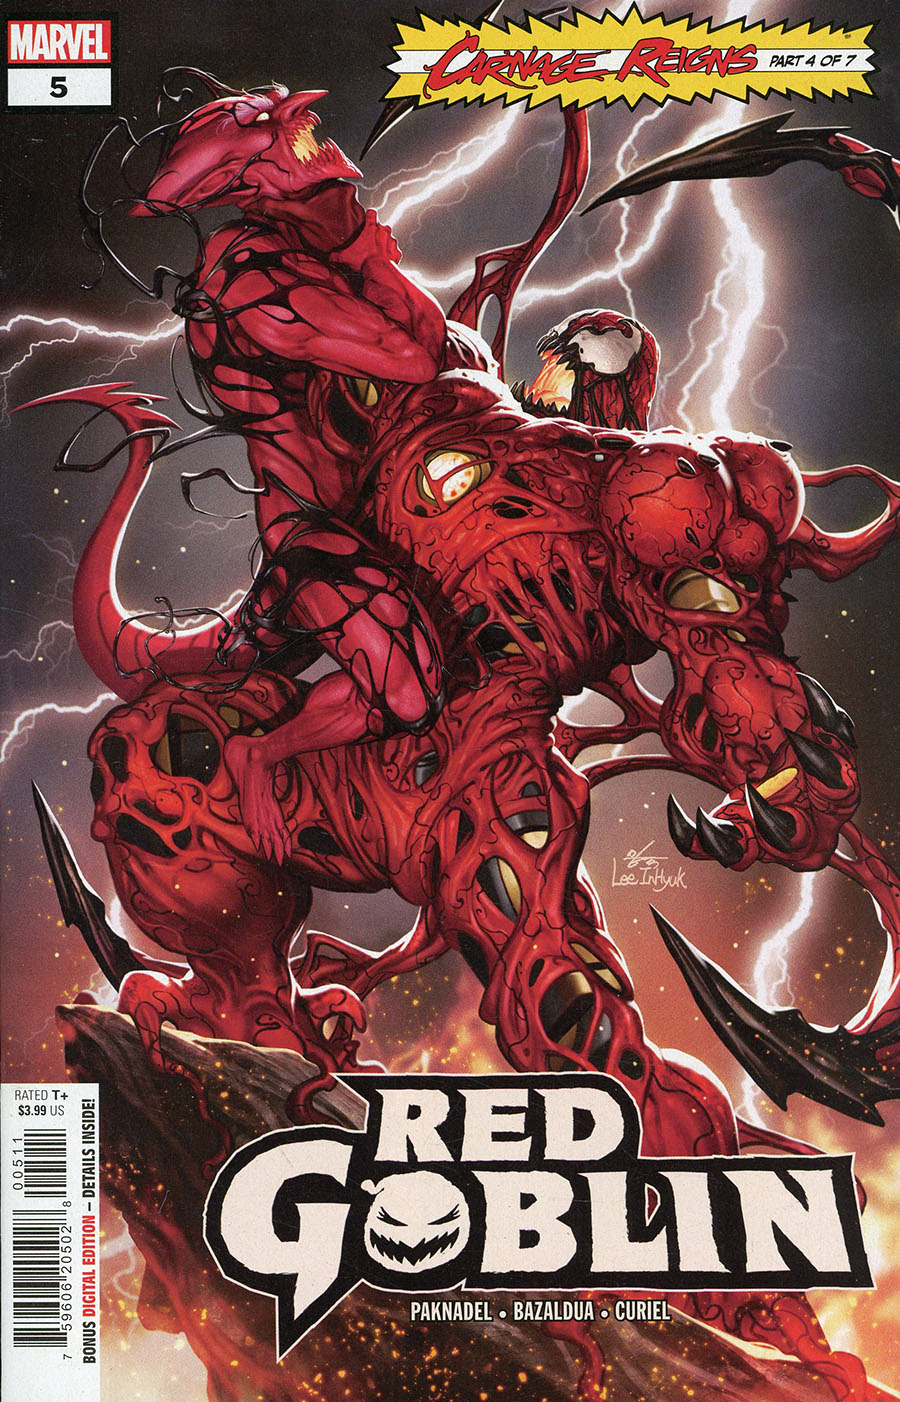 Red Goblin #5 Cover A Regular Inhyuk Lee Cover (Carnage Reigns Part 4)